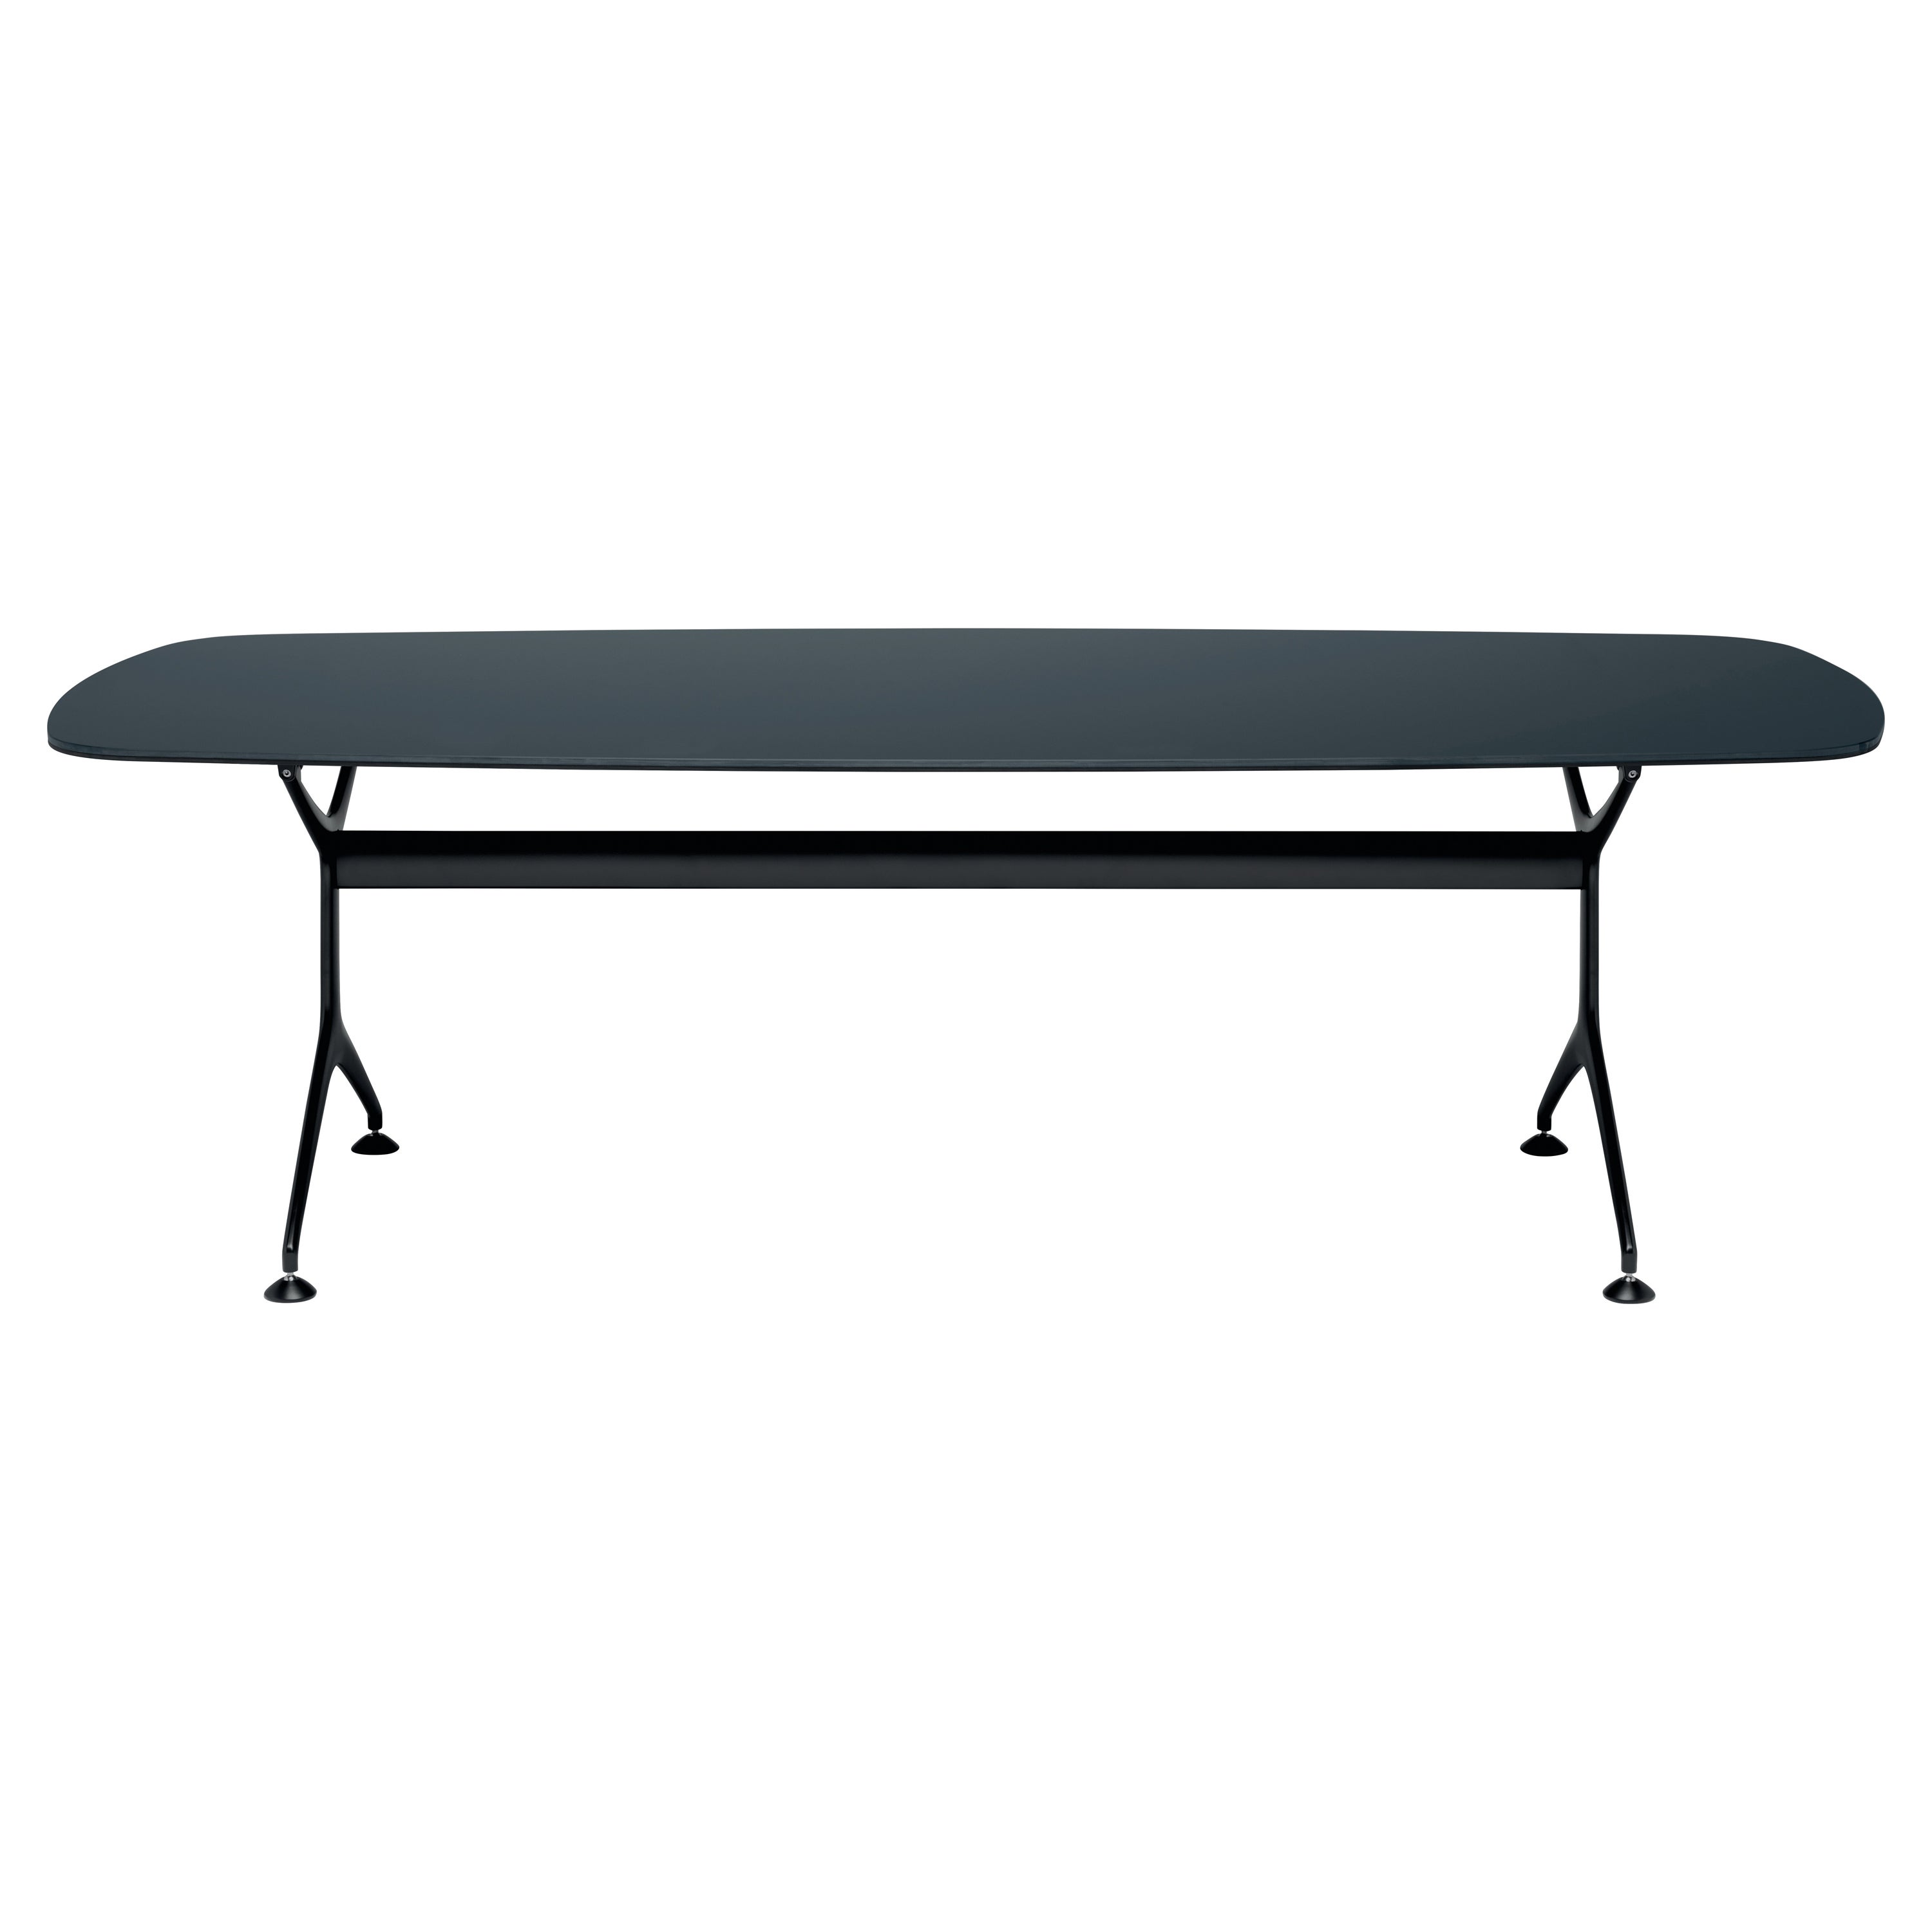 Alias Frametable 190 in Black Glass Top with Smooth Lacquered Aluminium Frame